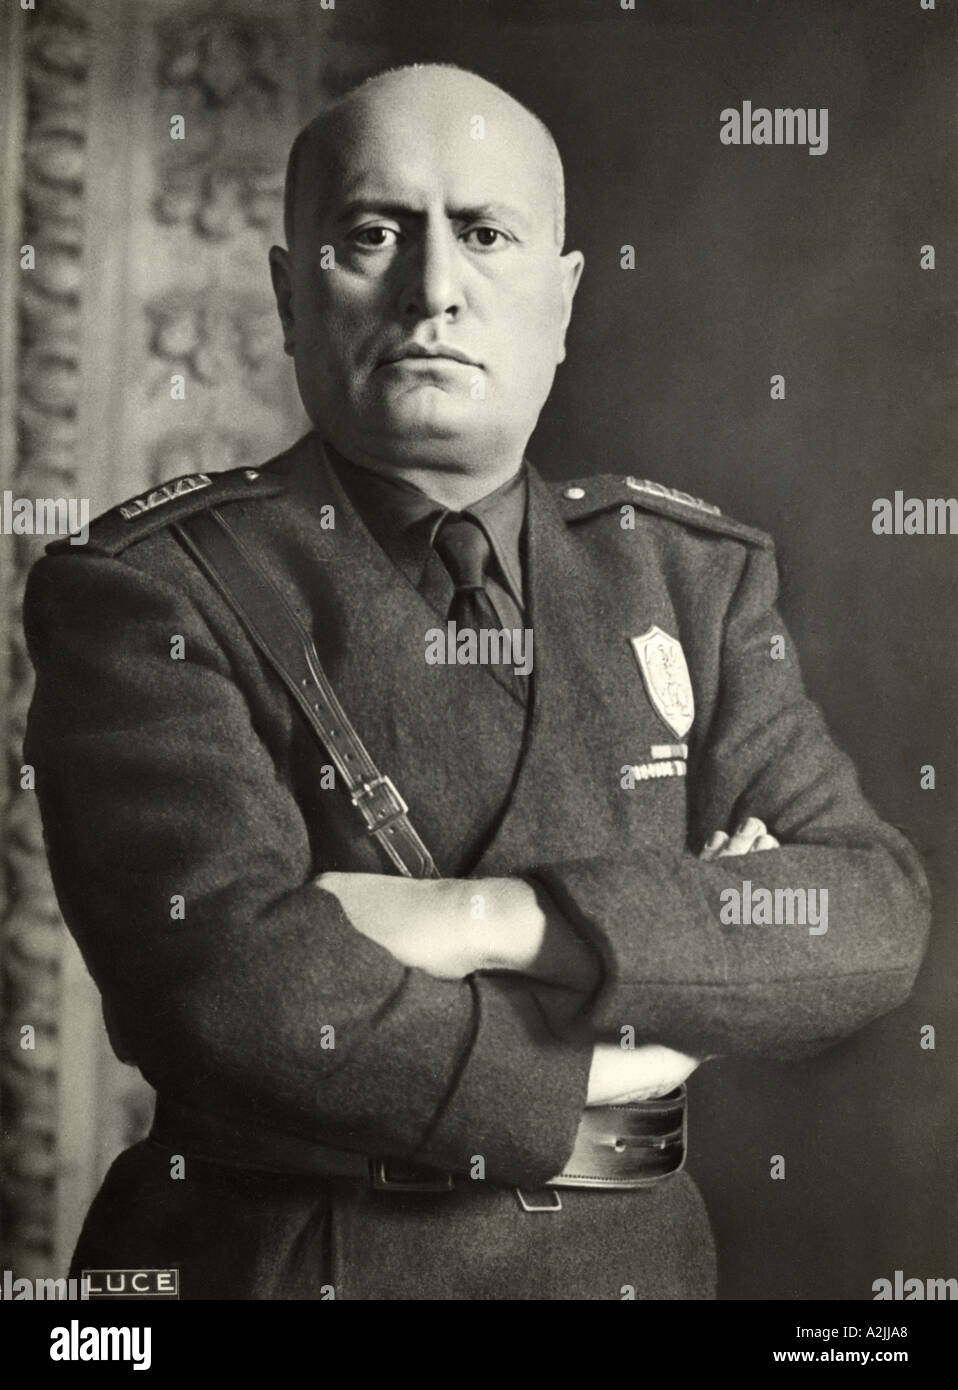 BENITO MUSSOLINI Italian dictator here in his favourite pose taken by his personal photographer Luce Stock Photo